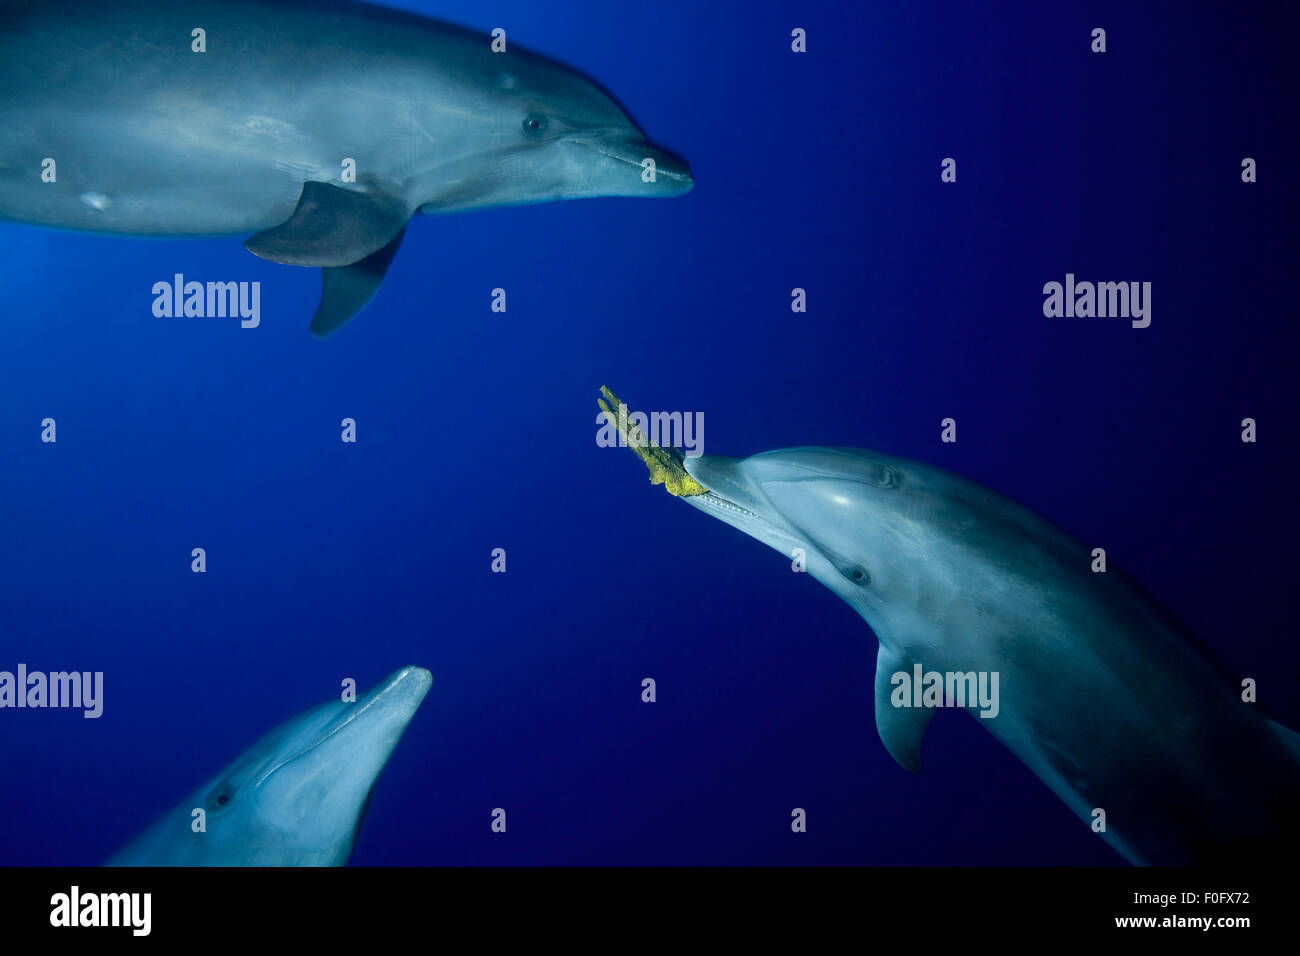 TRIO OF BOTTLE NOSE DOLPHIN PLAY WITH SPONGE Stock Photo